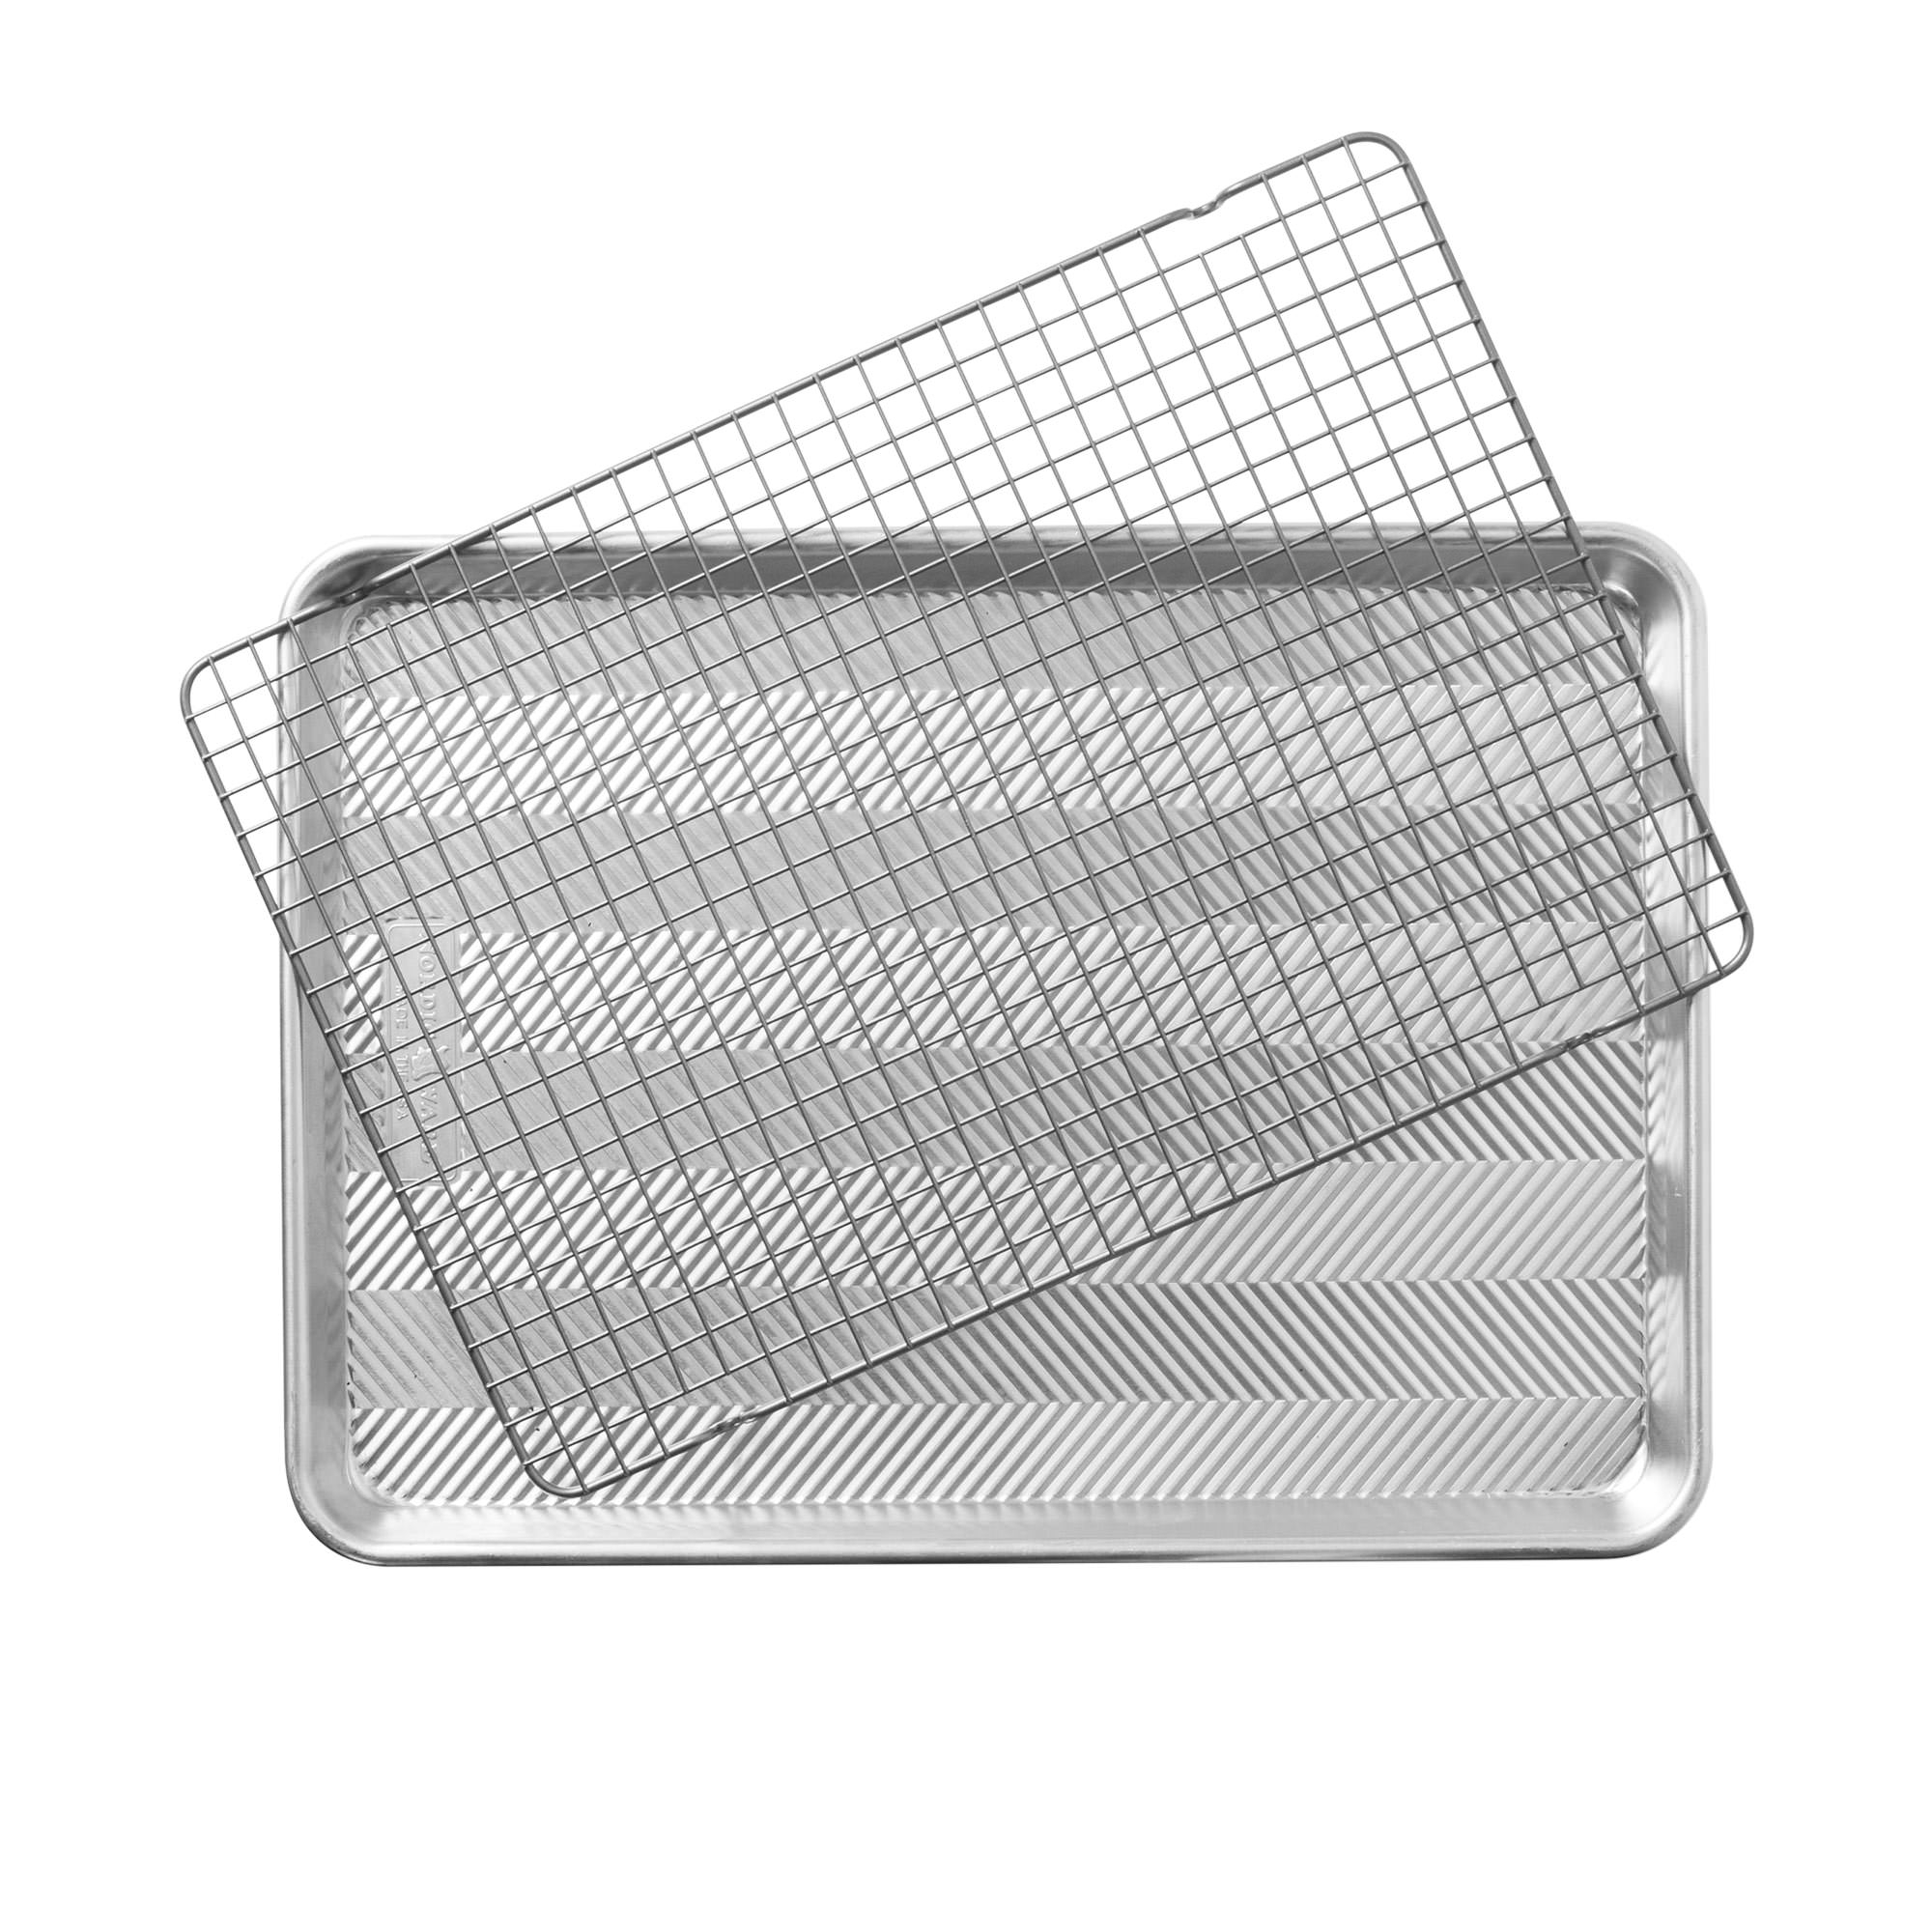 Nordic Ware Naturals Prism Textured Baking Pan with Non Stick Grid 45.5x32.5cm Image 1